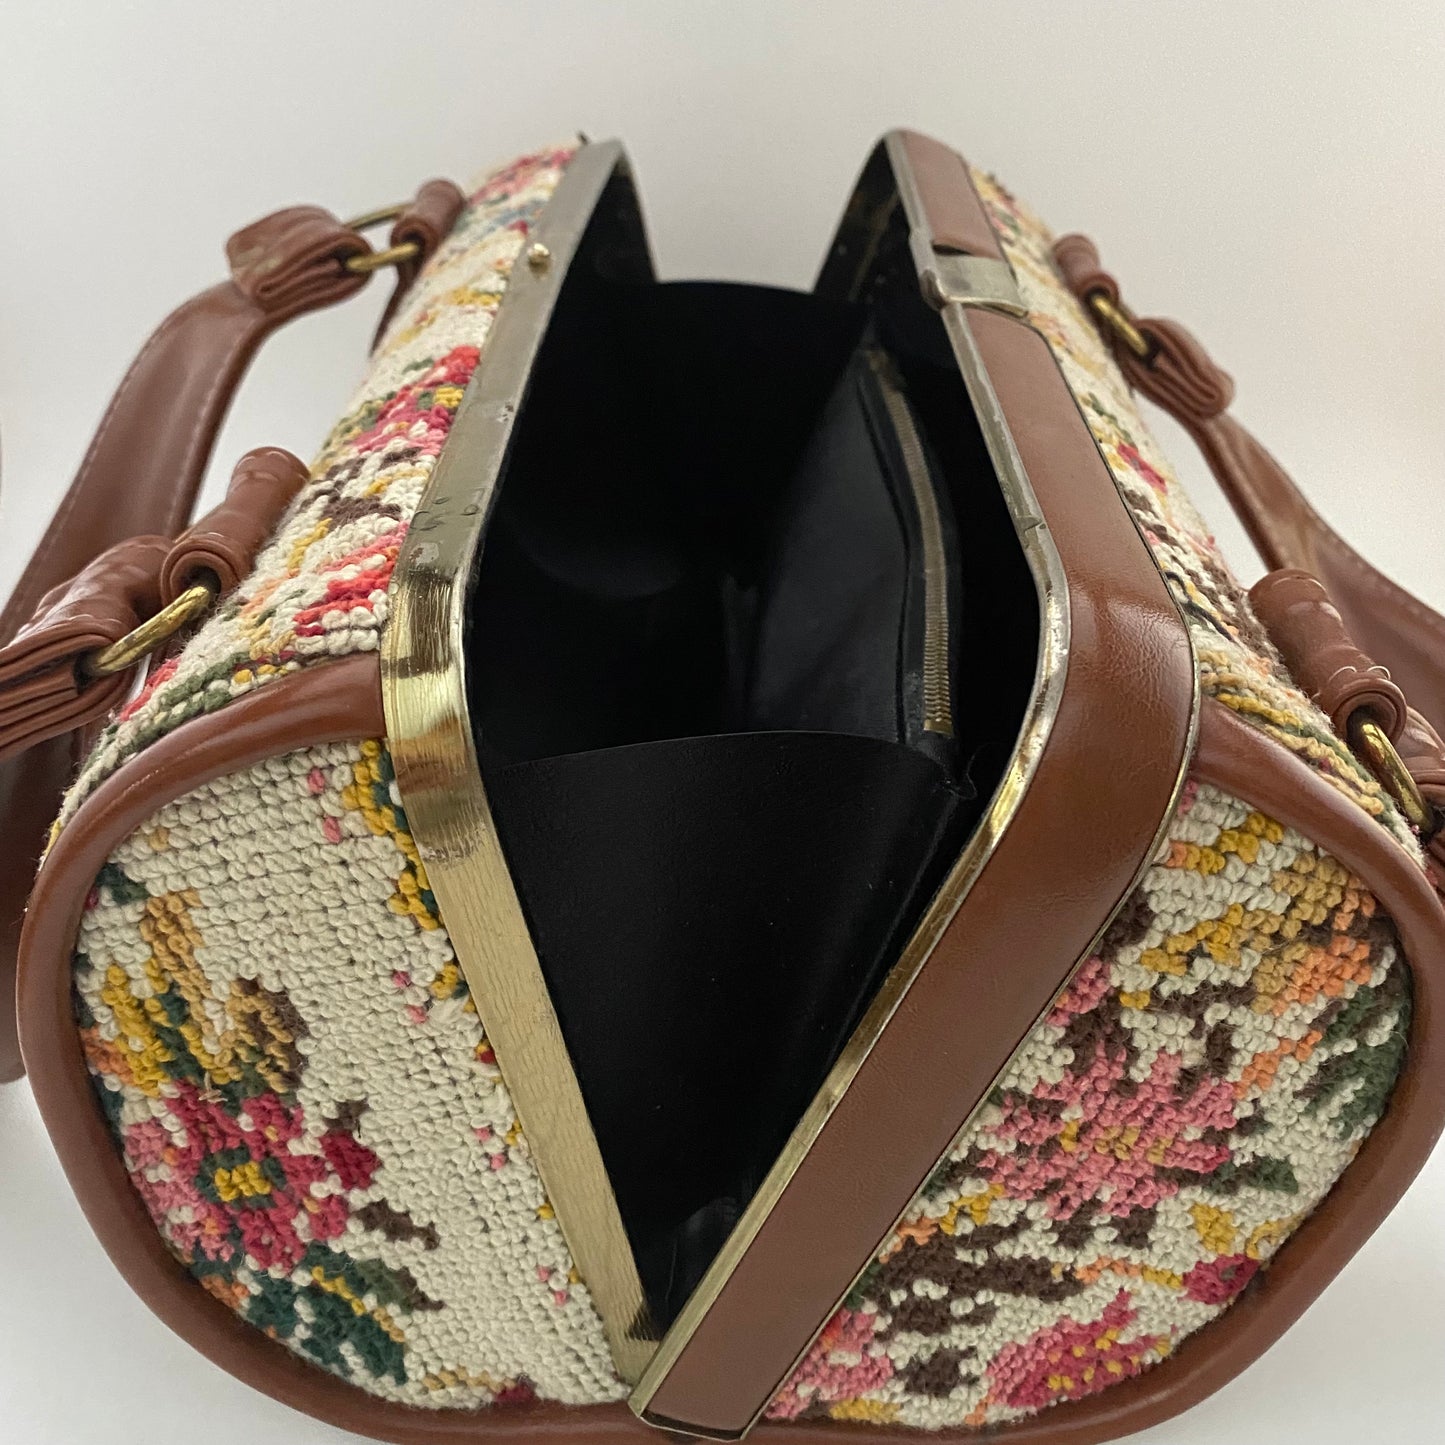 Late 60s/ Early 70s Needlepoint Barrel Bag